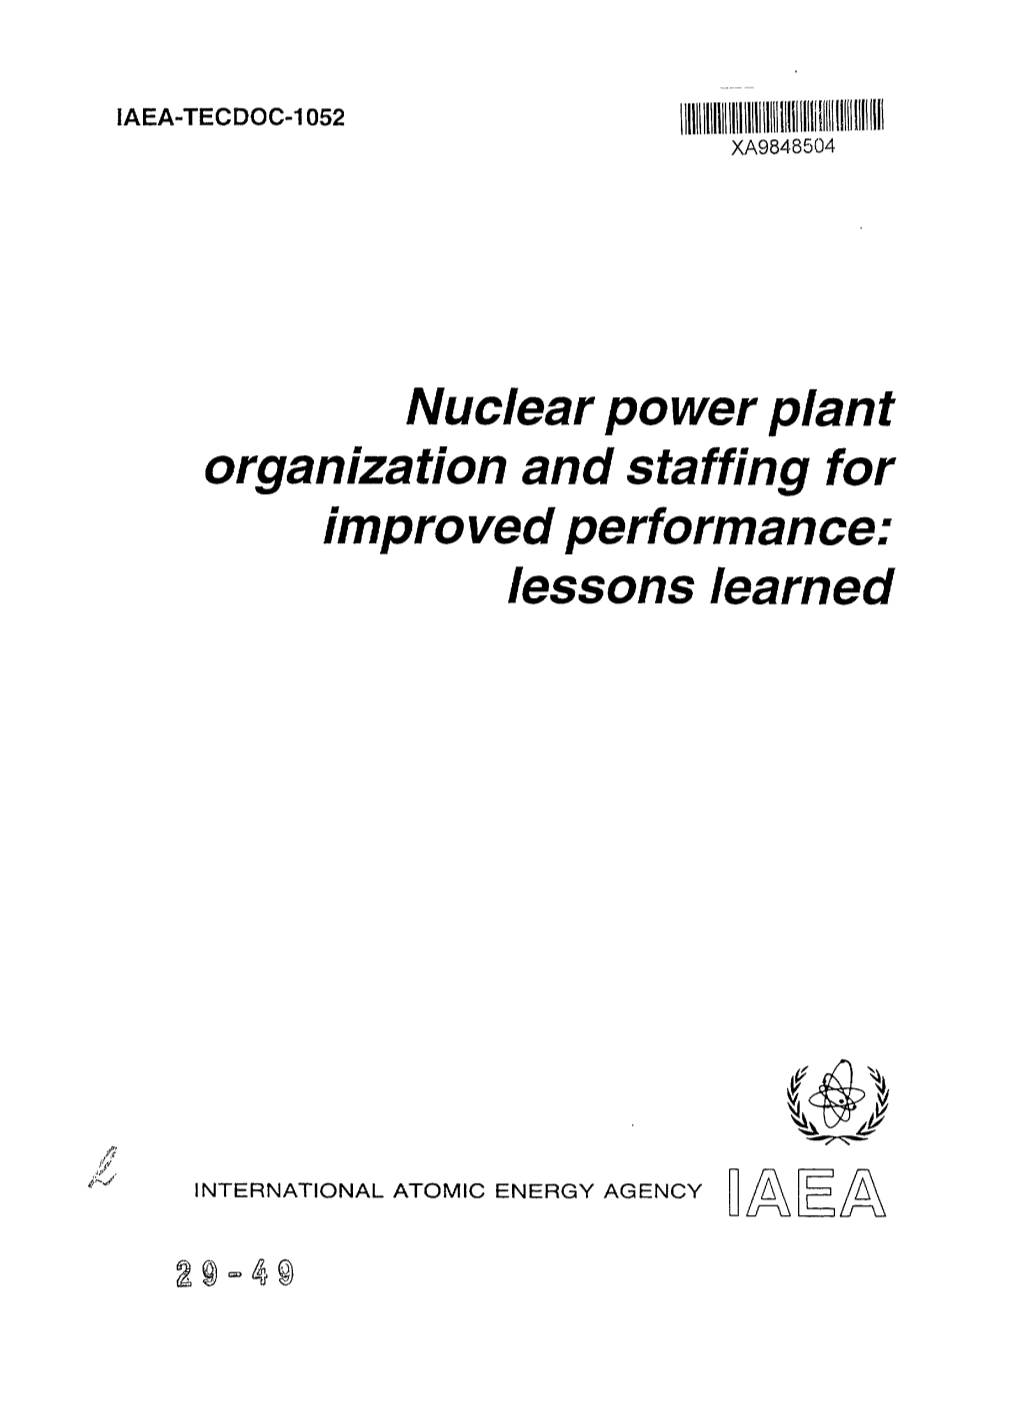 Nuclear Power Plant Organization and Staffing for Lessons Learned